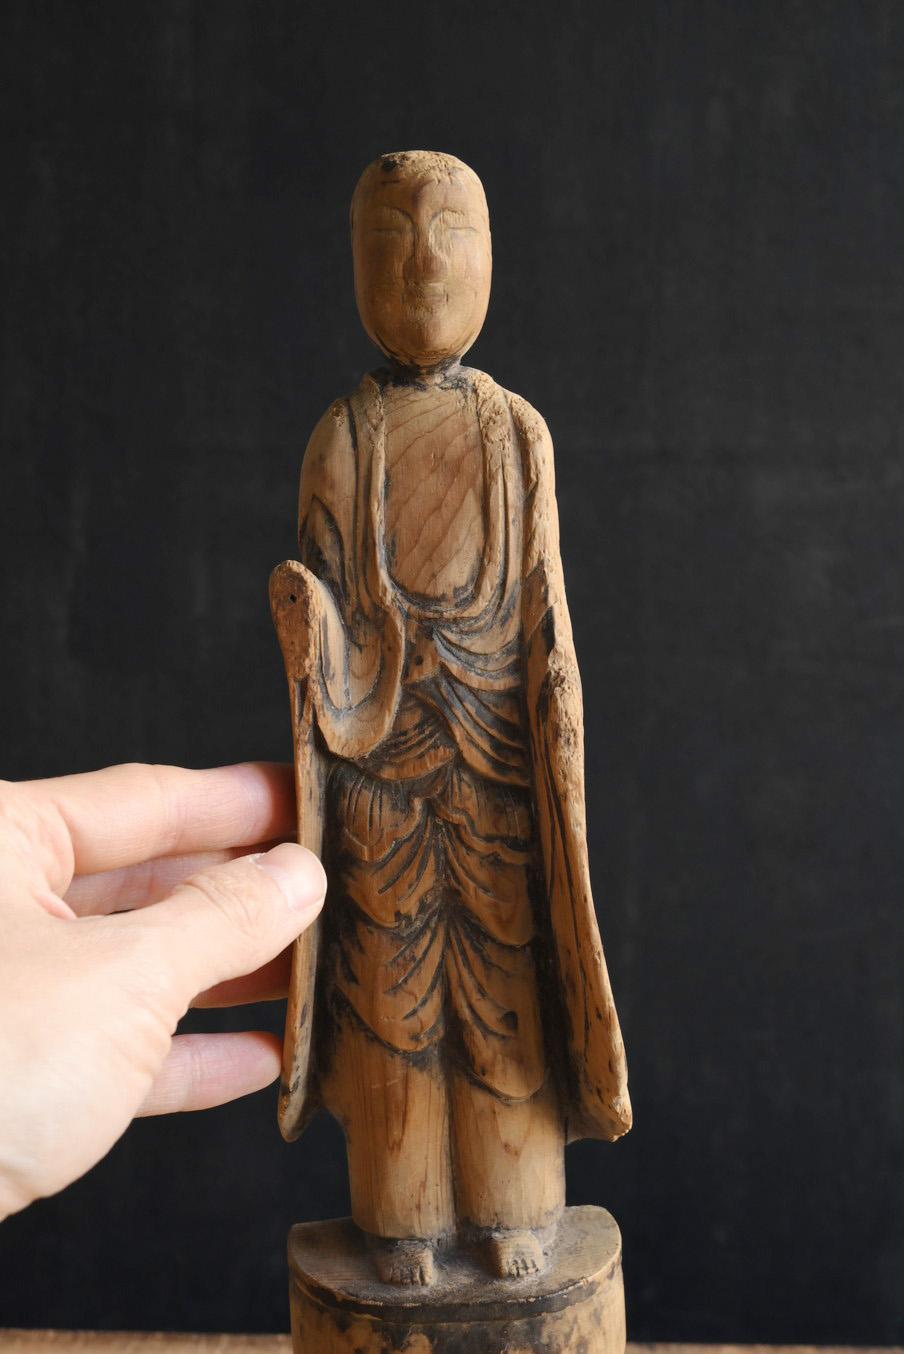 This is an old Japanese Buddhist statue made around the Edo period.
The material is believed to be cypress or cedar.
The square pedestal at the bottom was added later.
The deity of this Buddha statue is Jizo Bodhisattva.
This Buddha statue is a Jizo